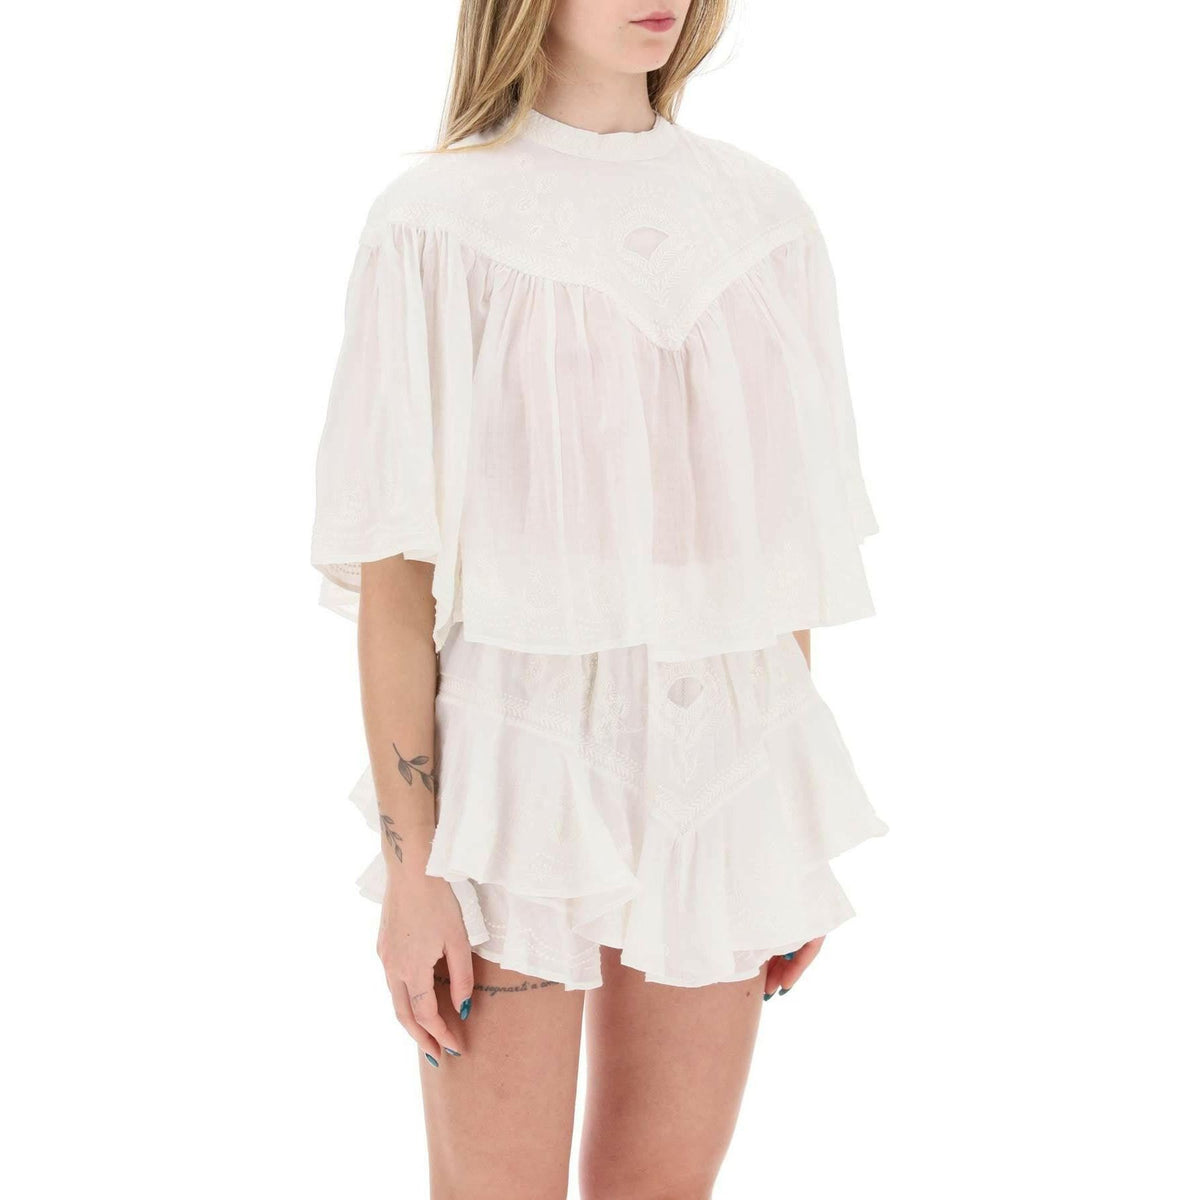 ISABEL MARANT - White Cropped Elodie Blouse With Wide Sleeves And Embroidery - JOHN JULIA